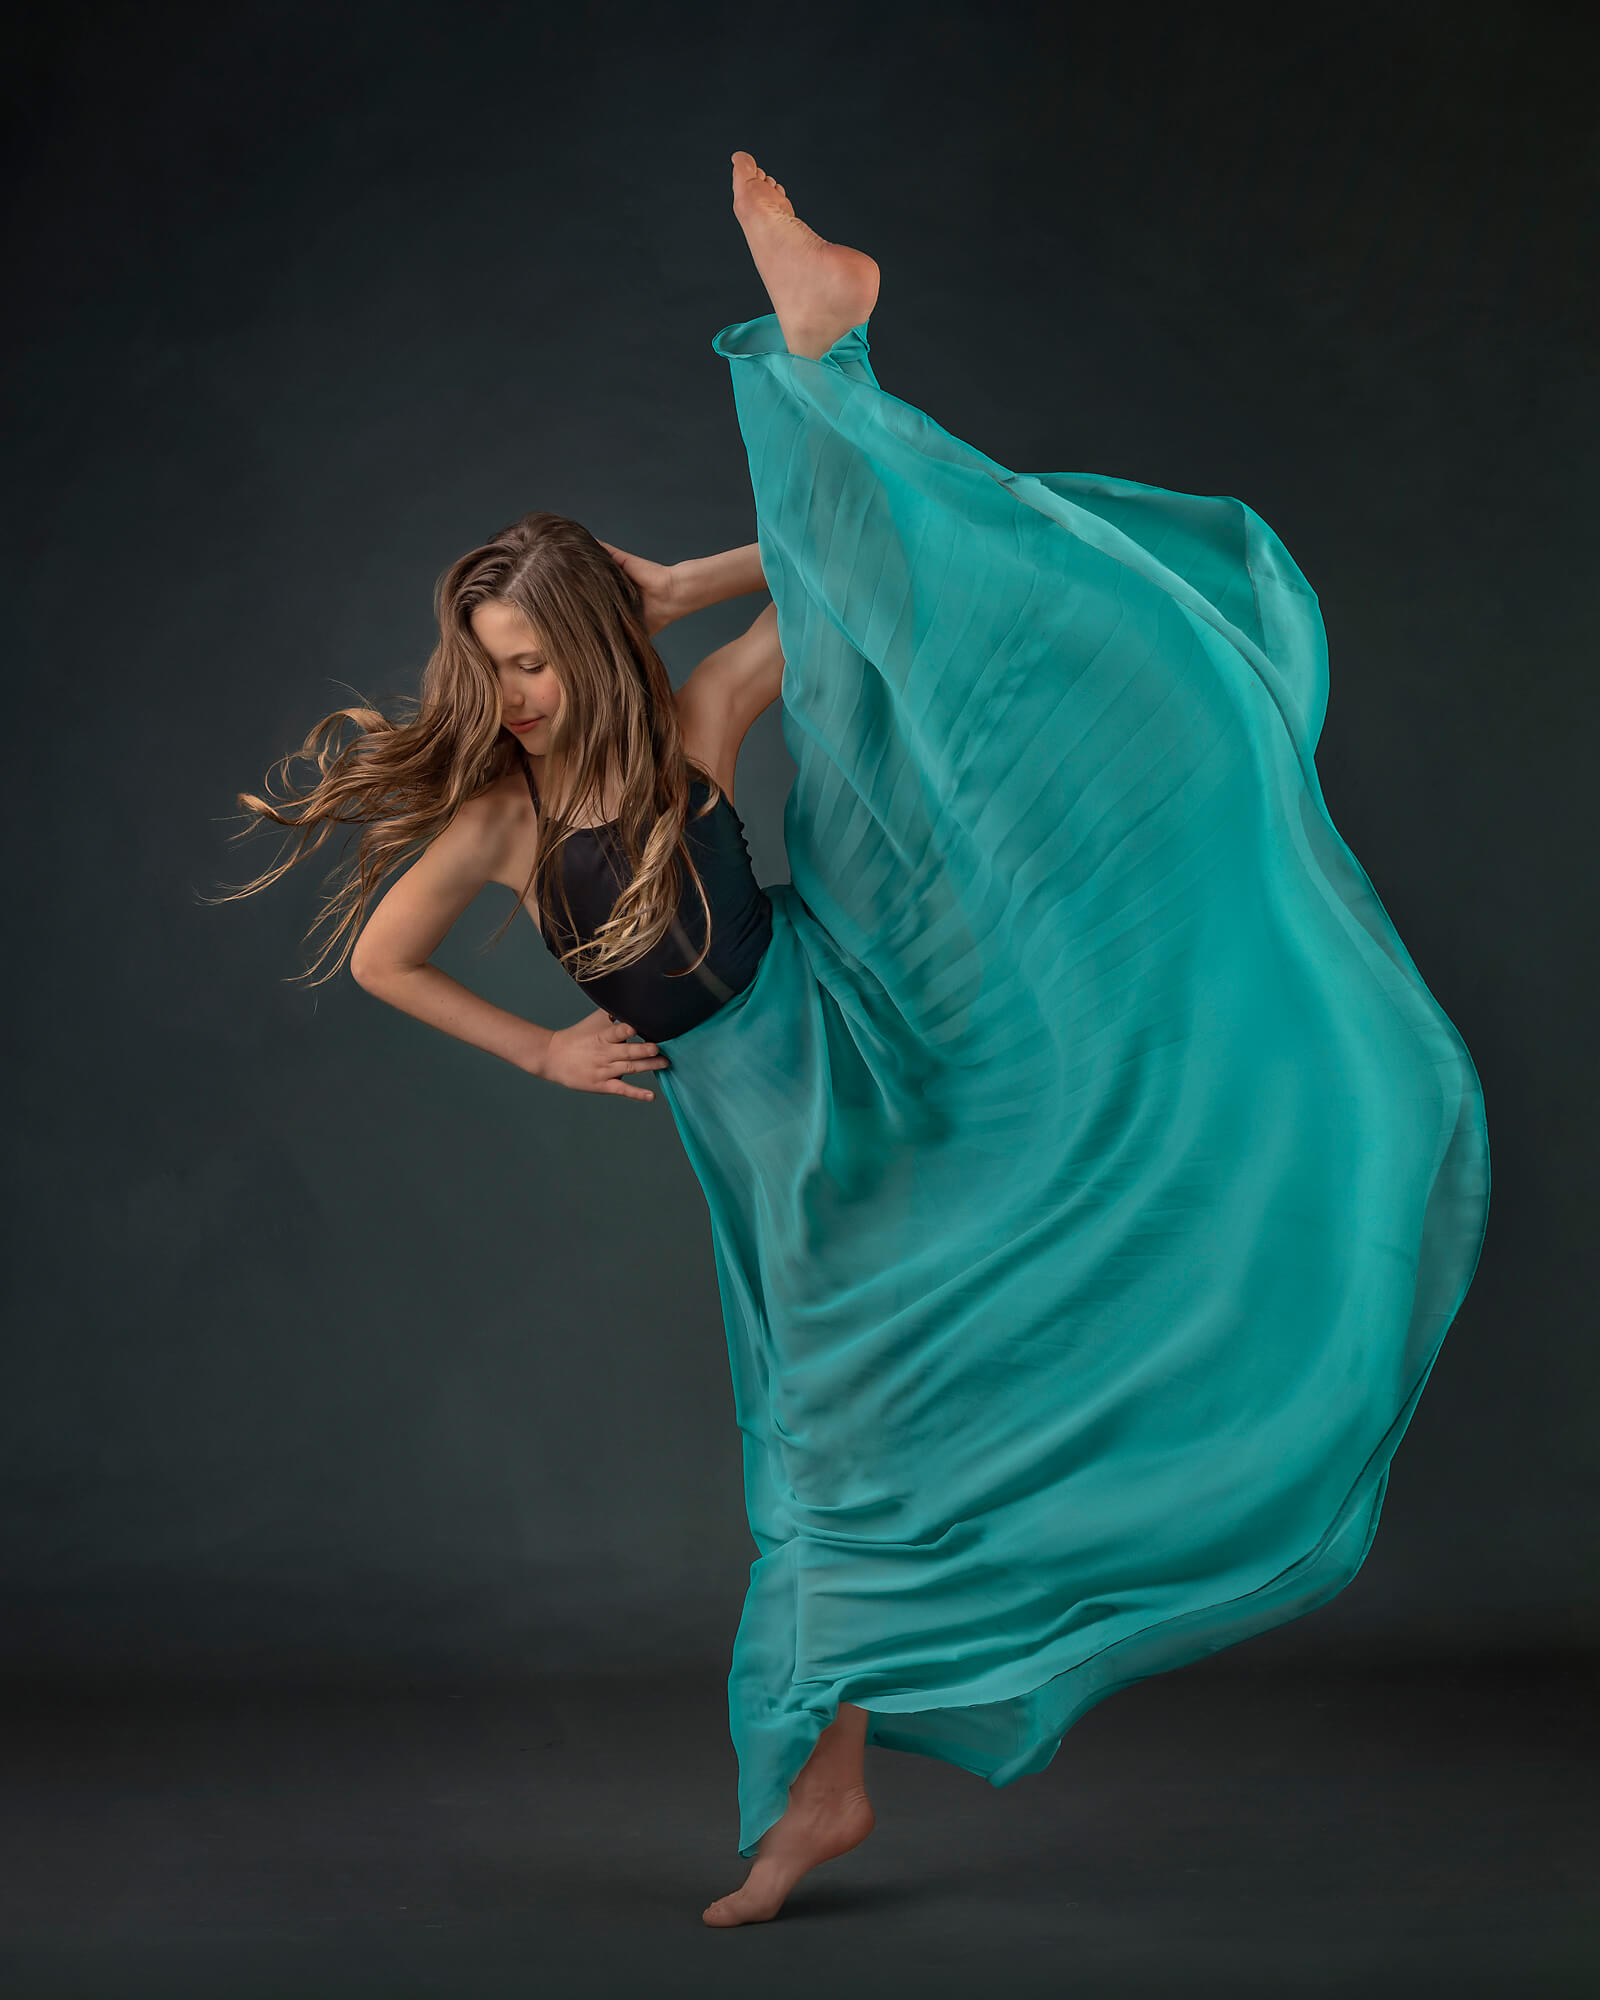 Young Torrance dancer pose in a teal skirt